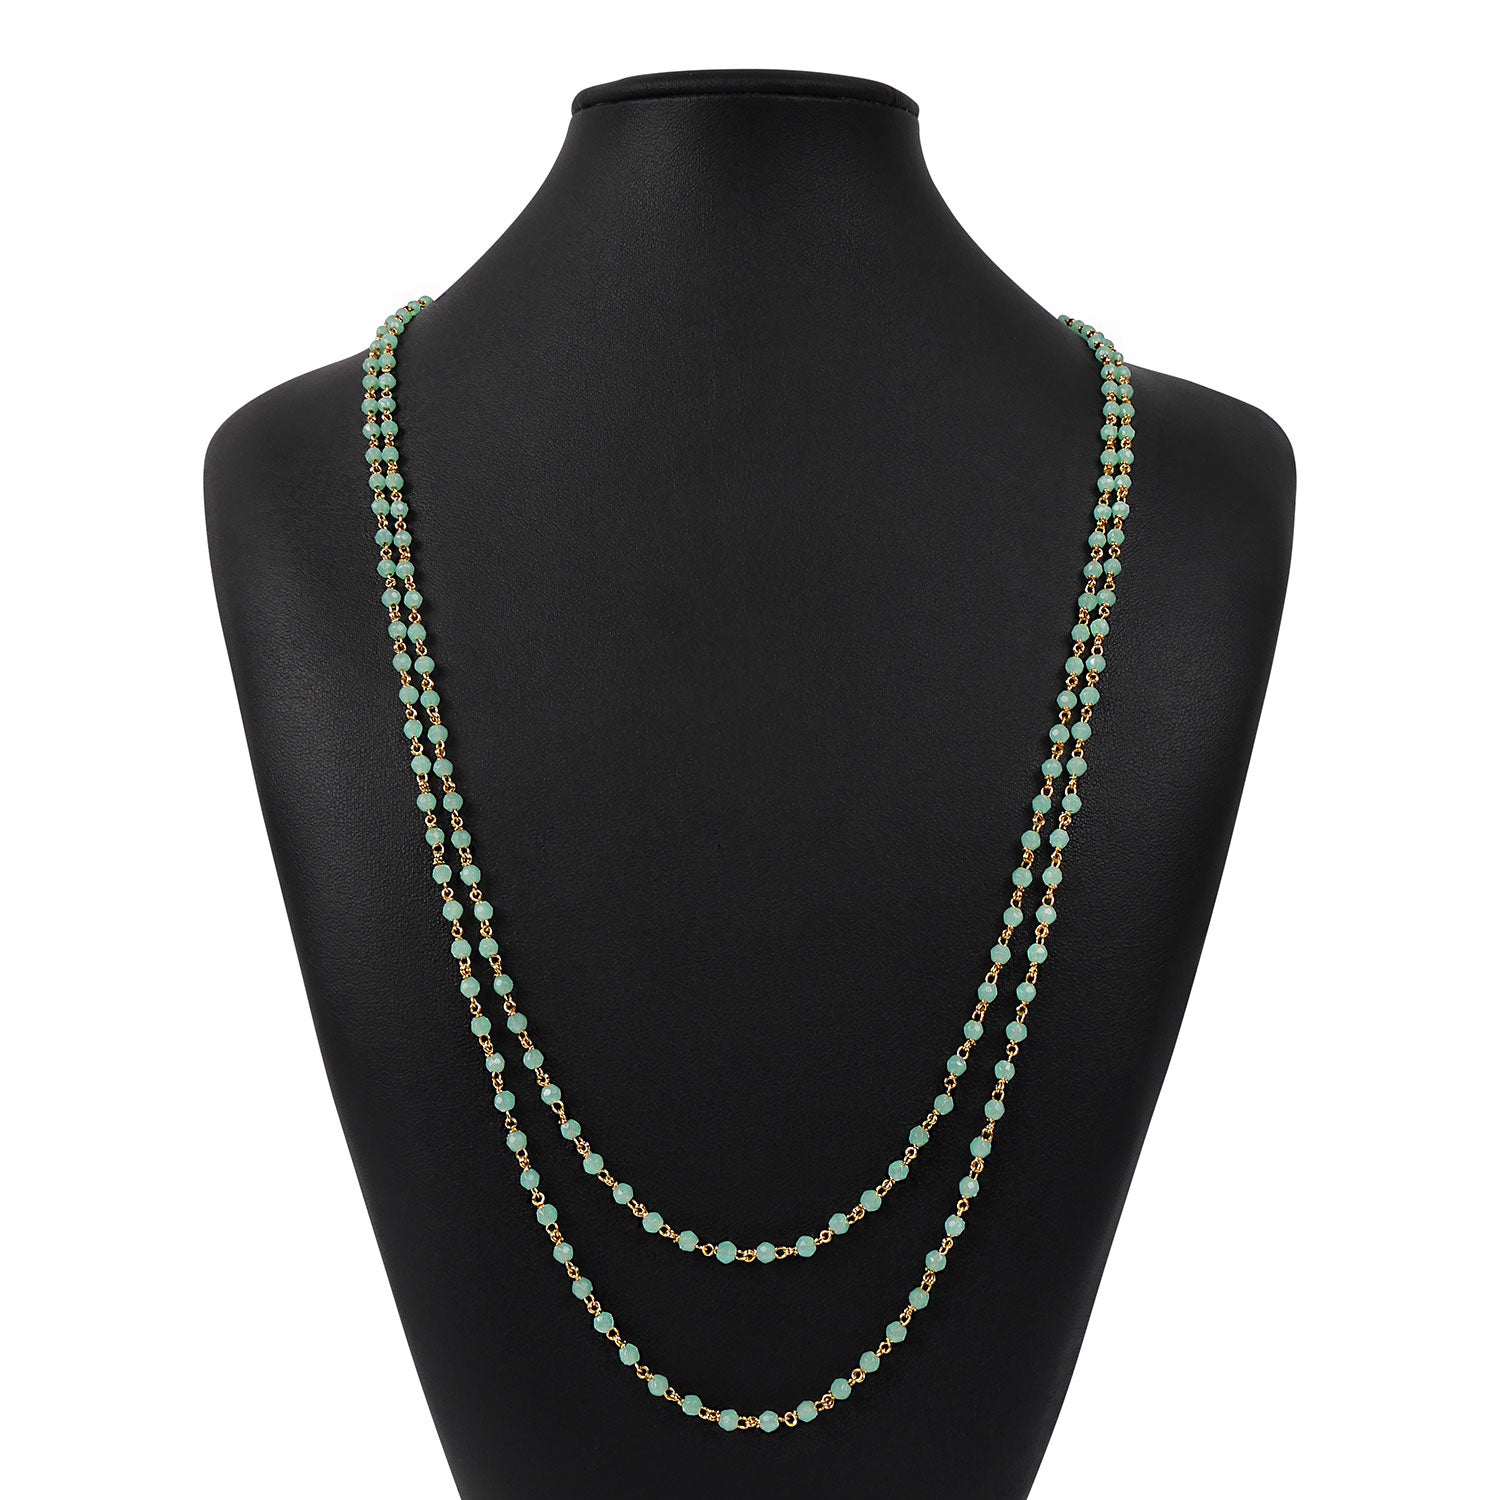 Maria Layered Bead Necklace in Mint